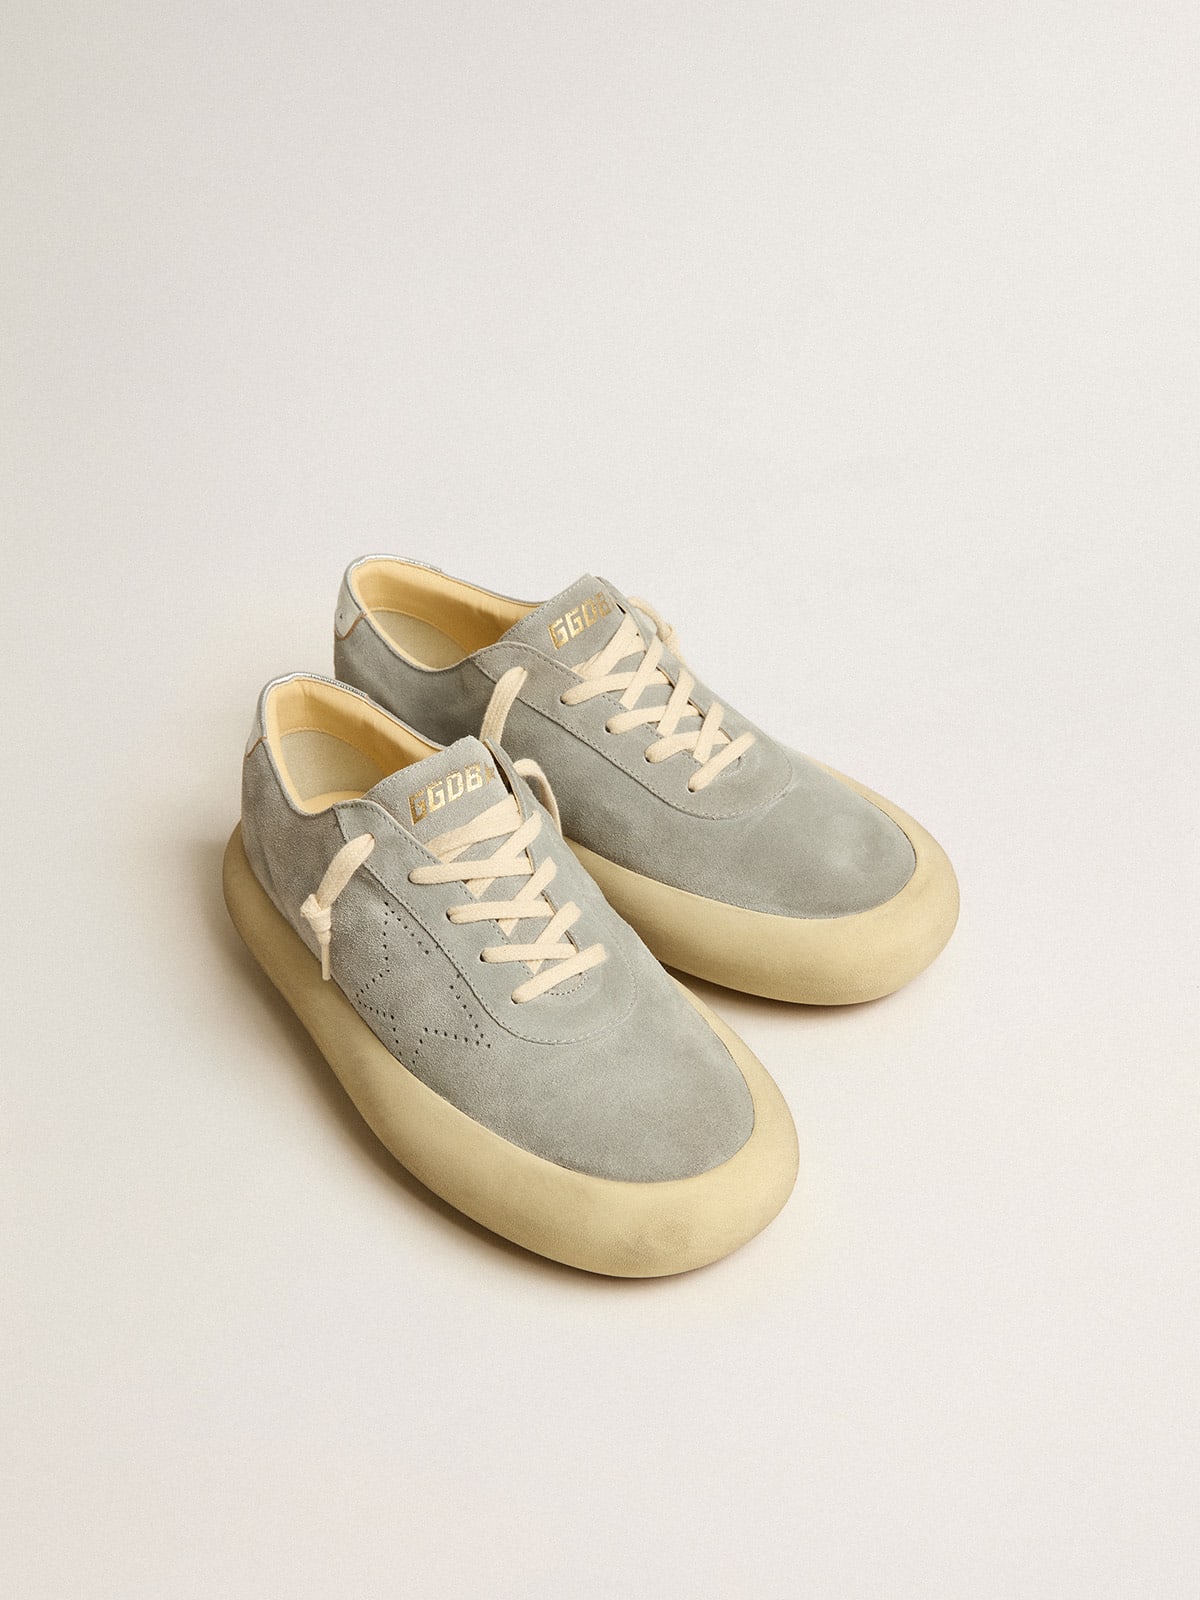 Golden Goose Men's Space-Star shoes in ice-gray suede with perforated ...